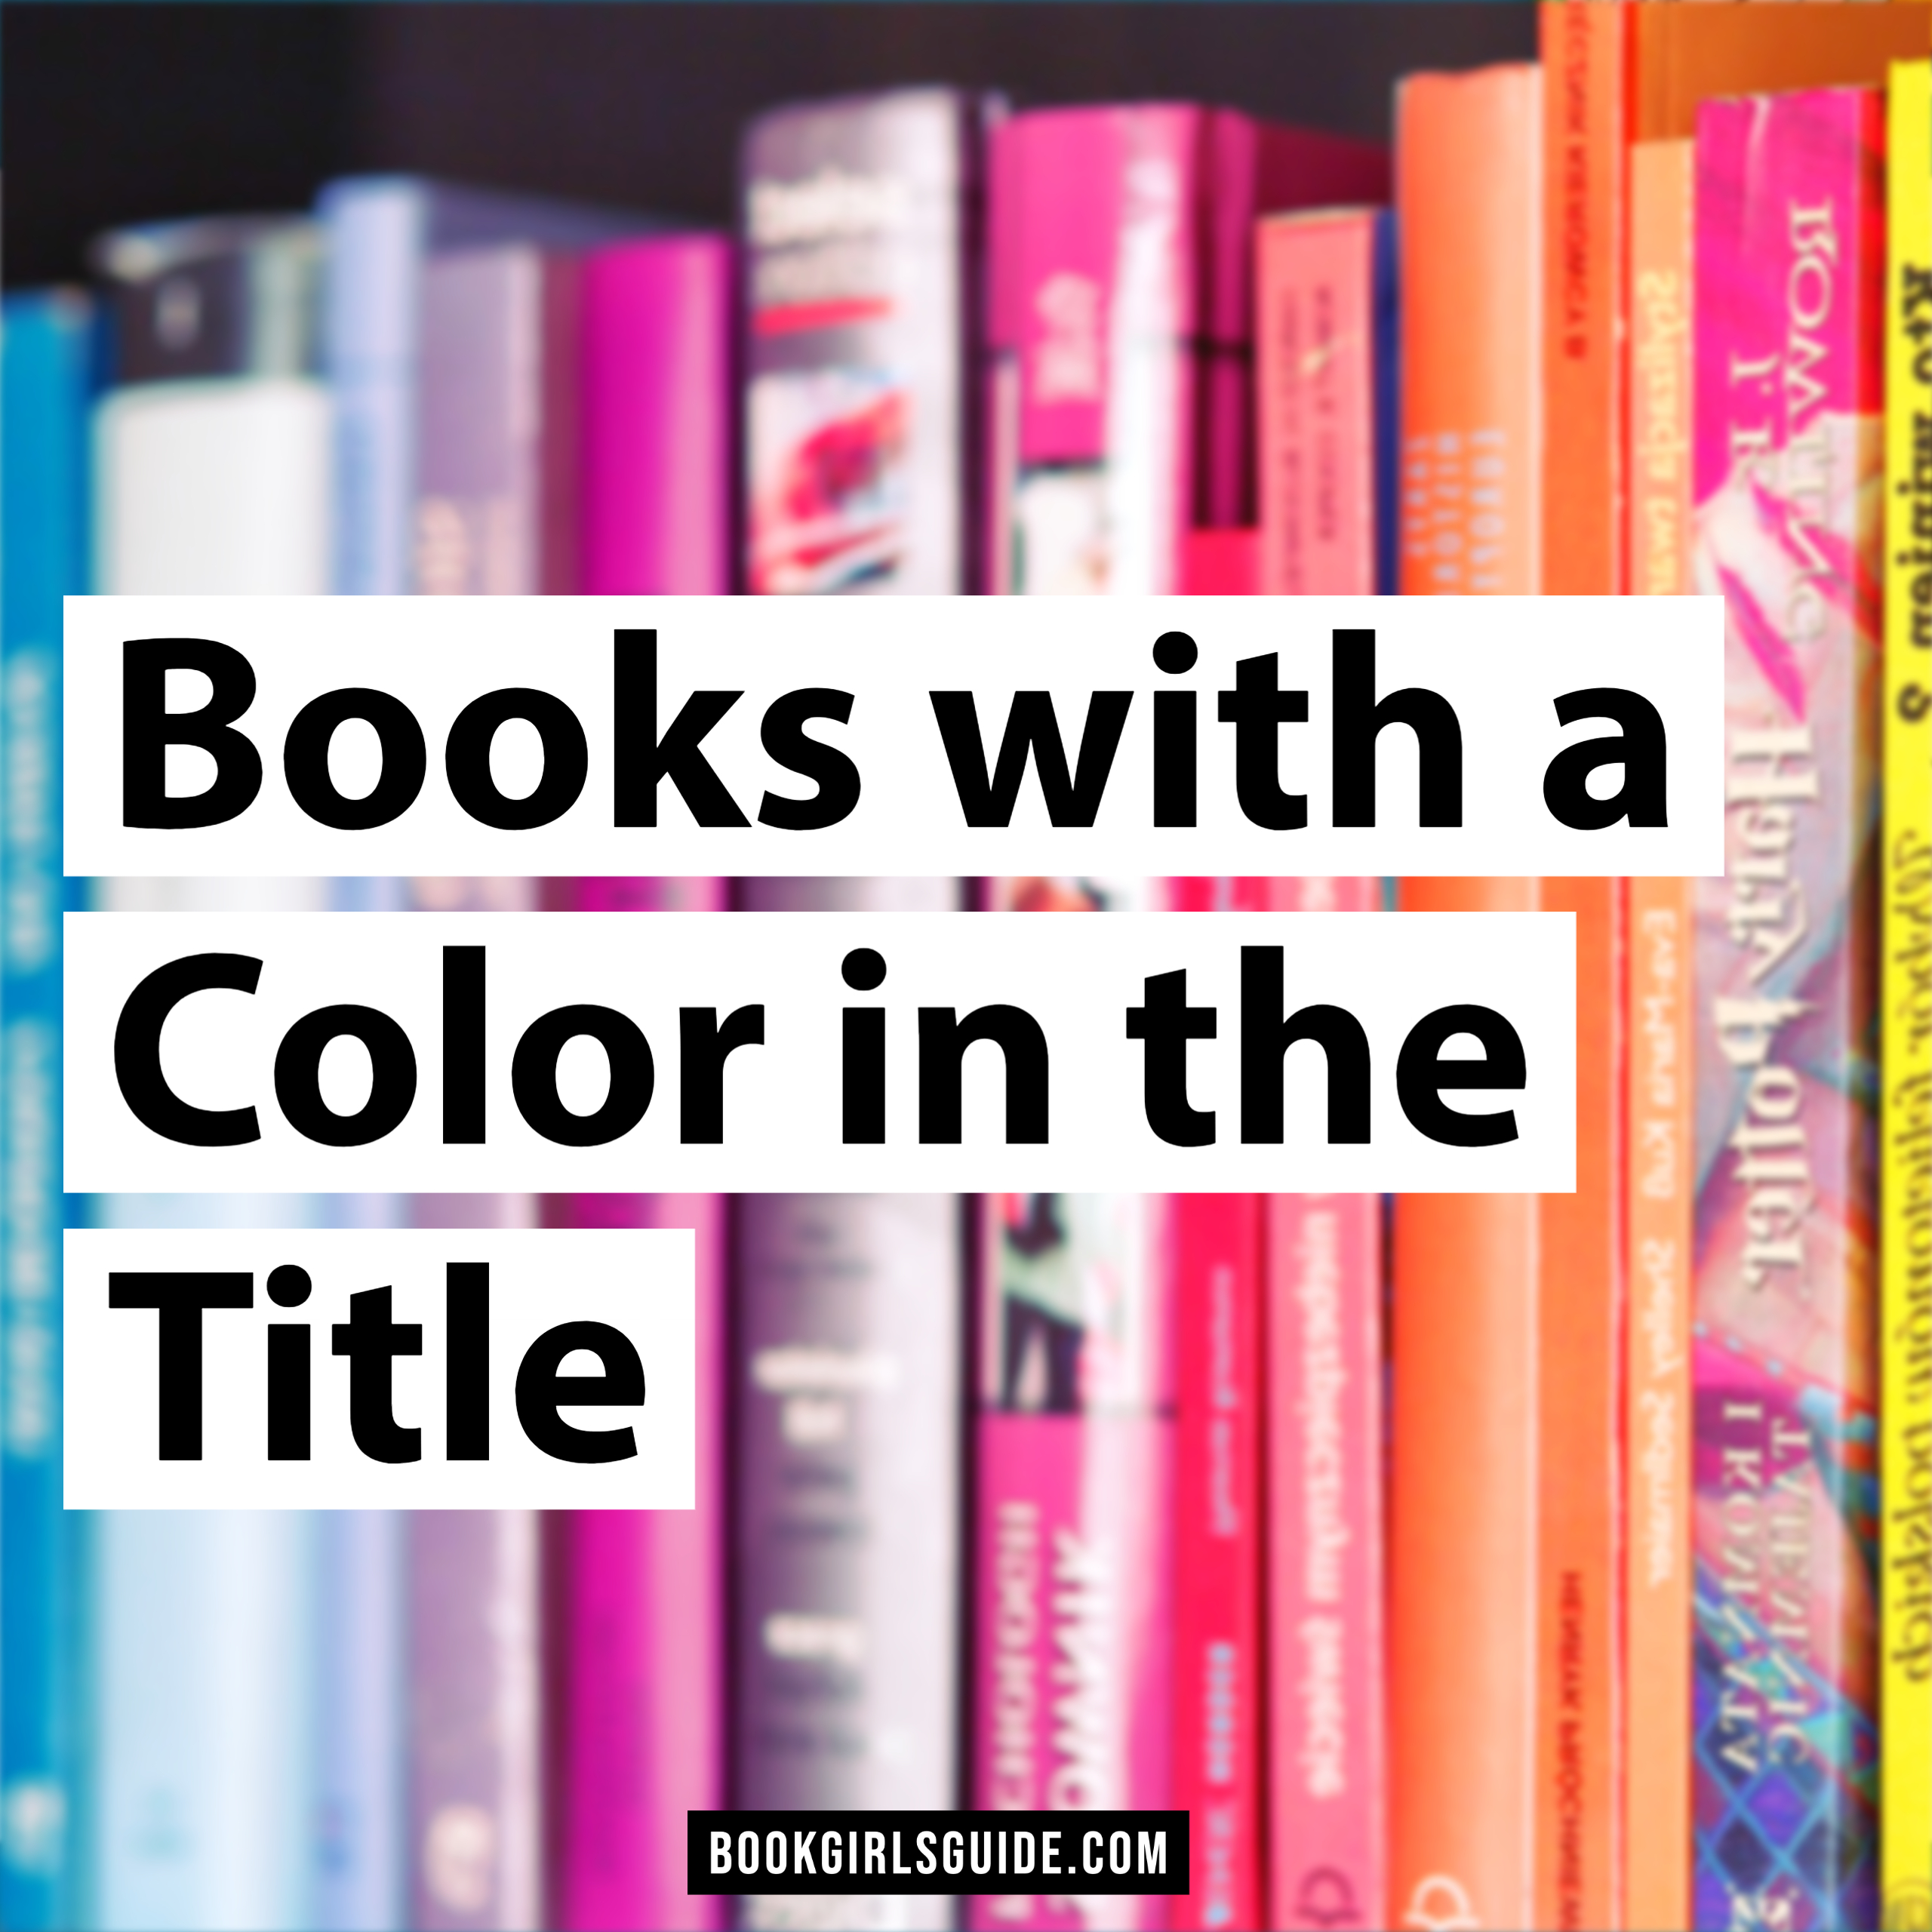 Books with a Color in the Title - Text over colorful books on a shelf